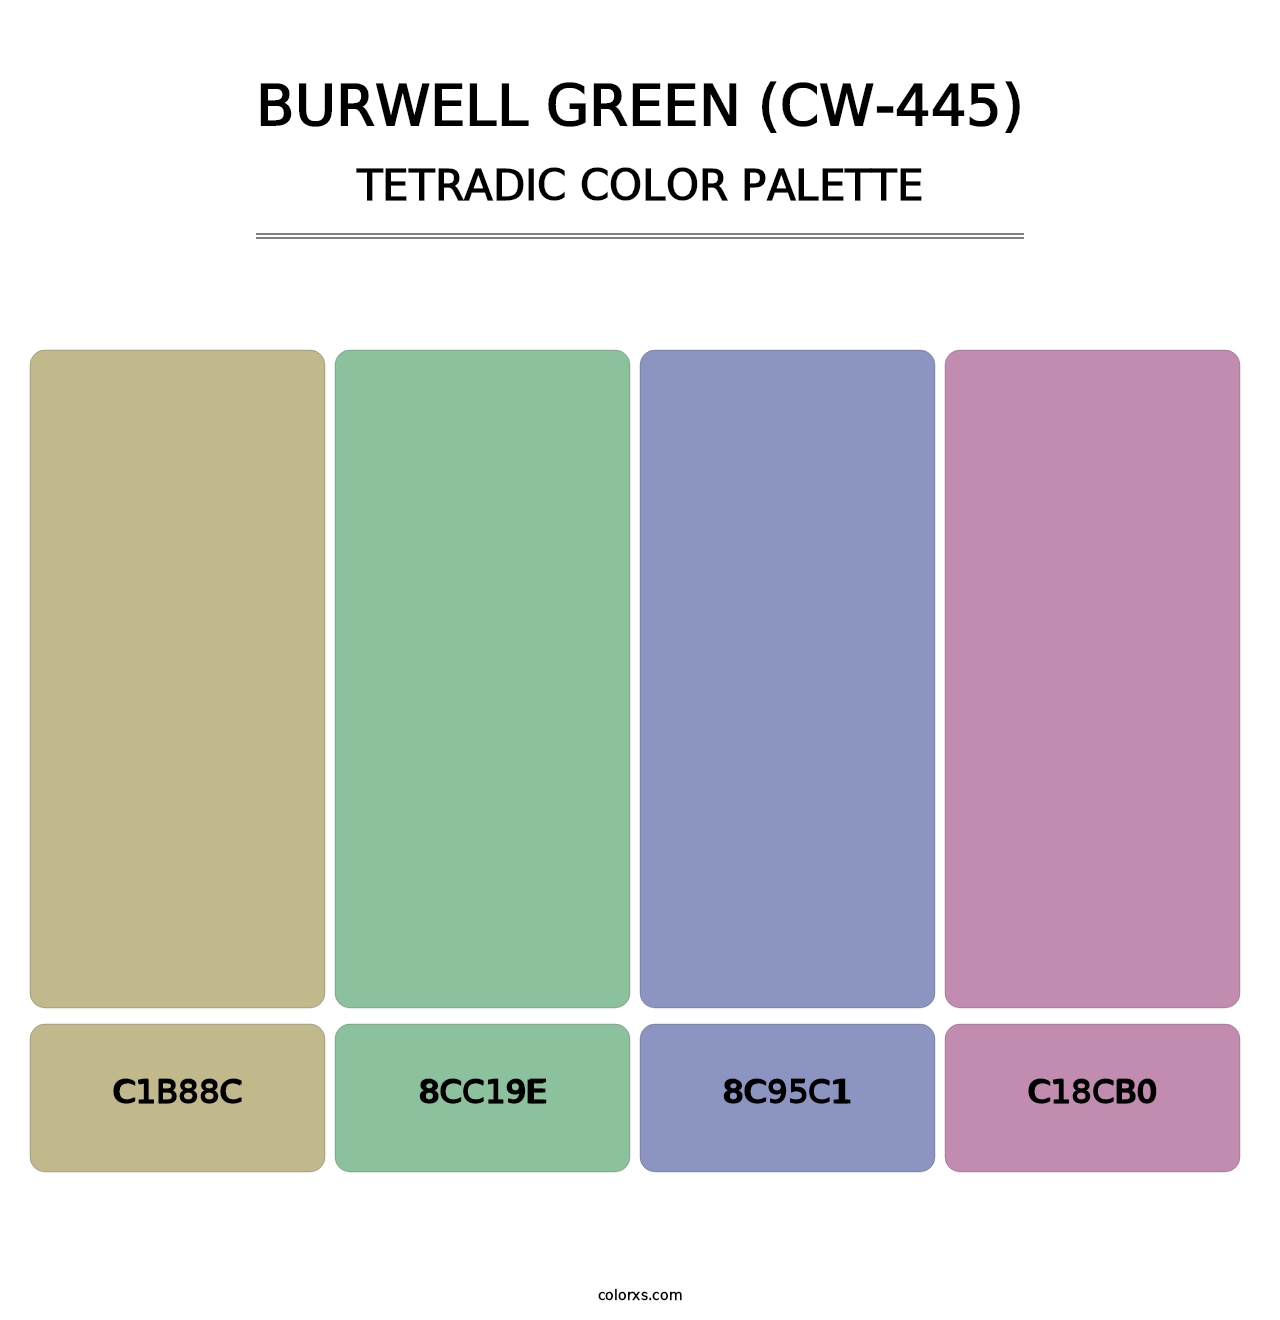 Burwell Green (CW-445) - Tetradic Color Palette